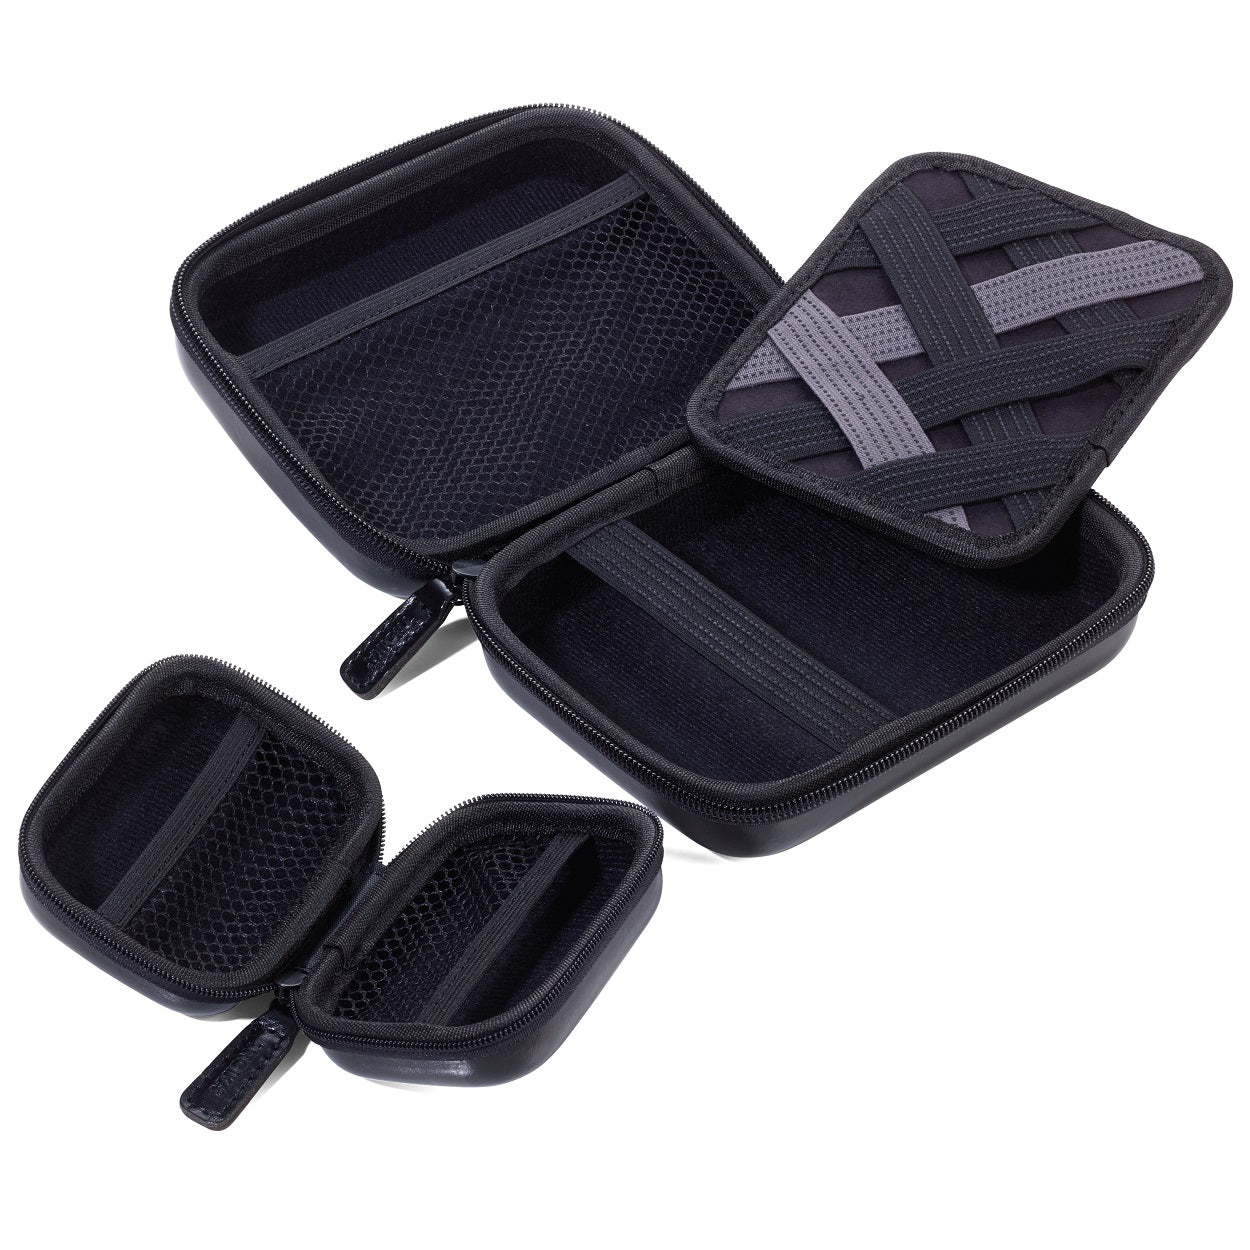 TROIKA Protective Organiser Cases with Zip ONPACK Black-Set of 2